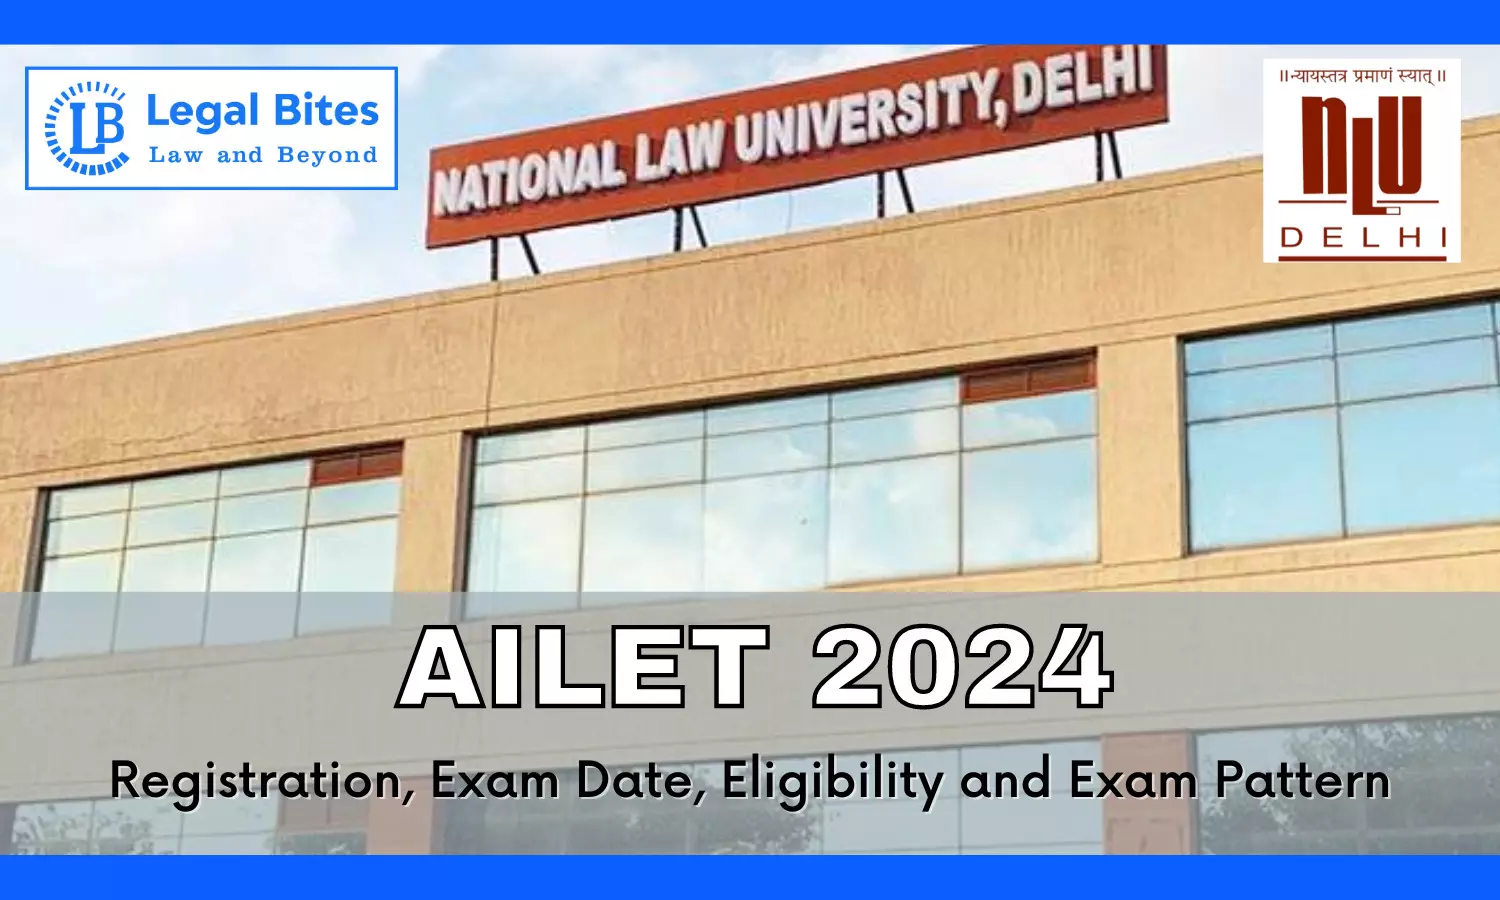 AILET 2024: Registration, Exam Date, Eligibility and Exam Pattern